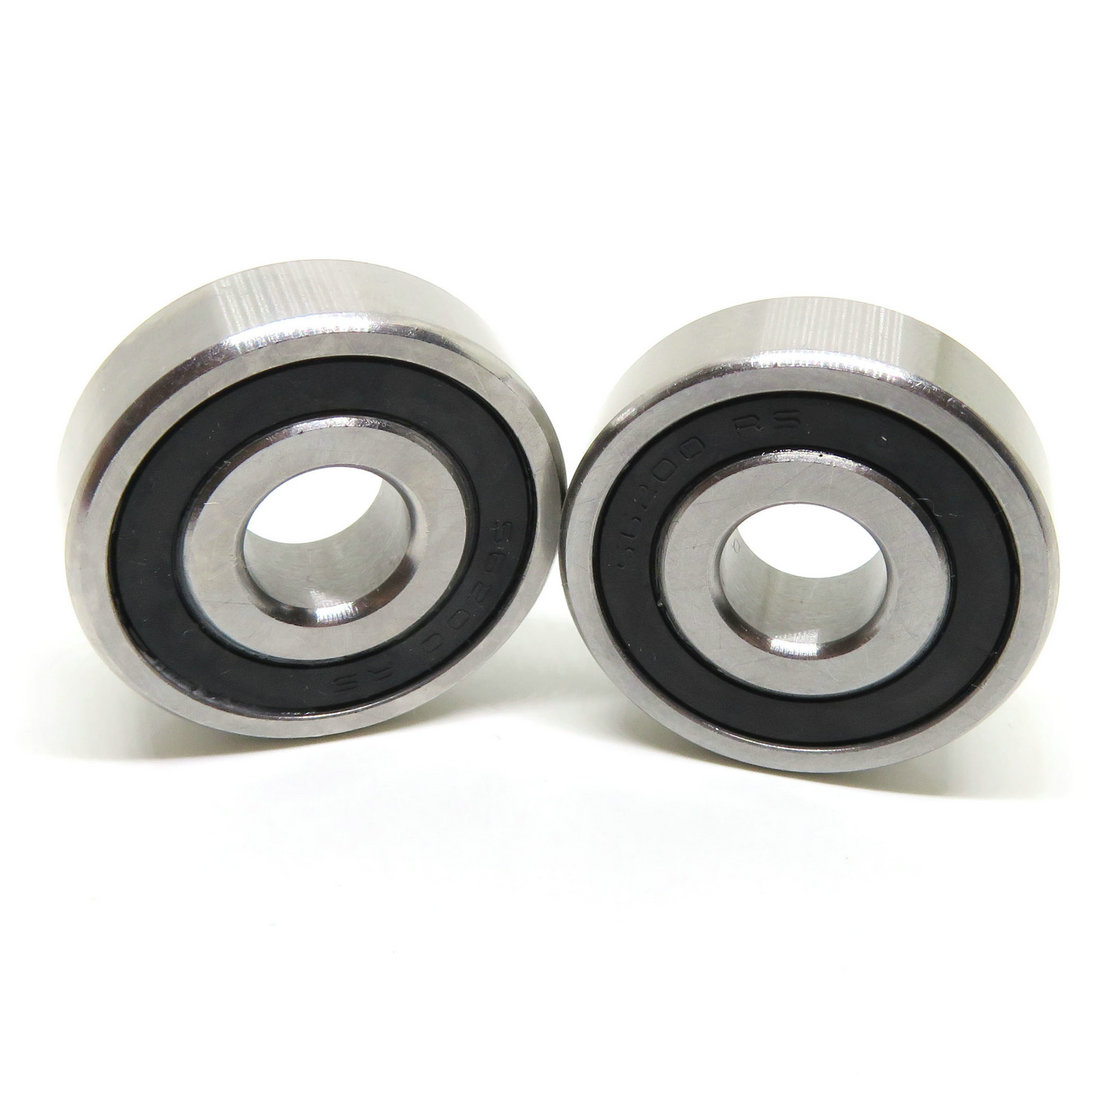 S6204RS 20x47x14mm 440C S6204-2RS Stainless Steel Ball Bearings ABEC-3 Rubber Sealed Bearing.jpg